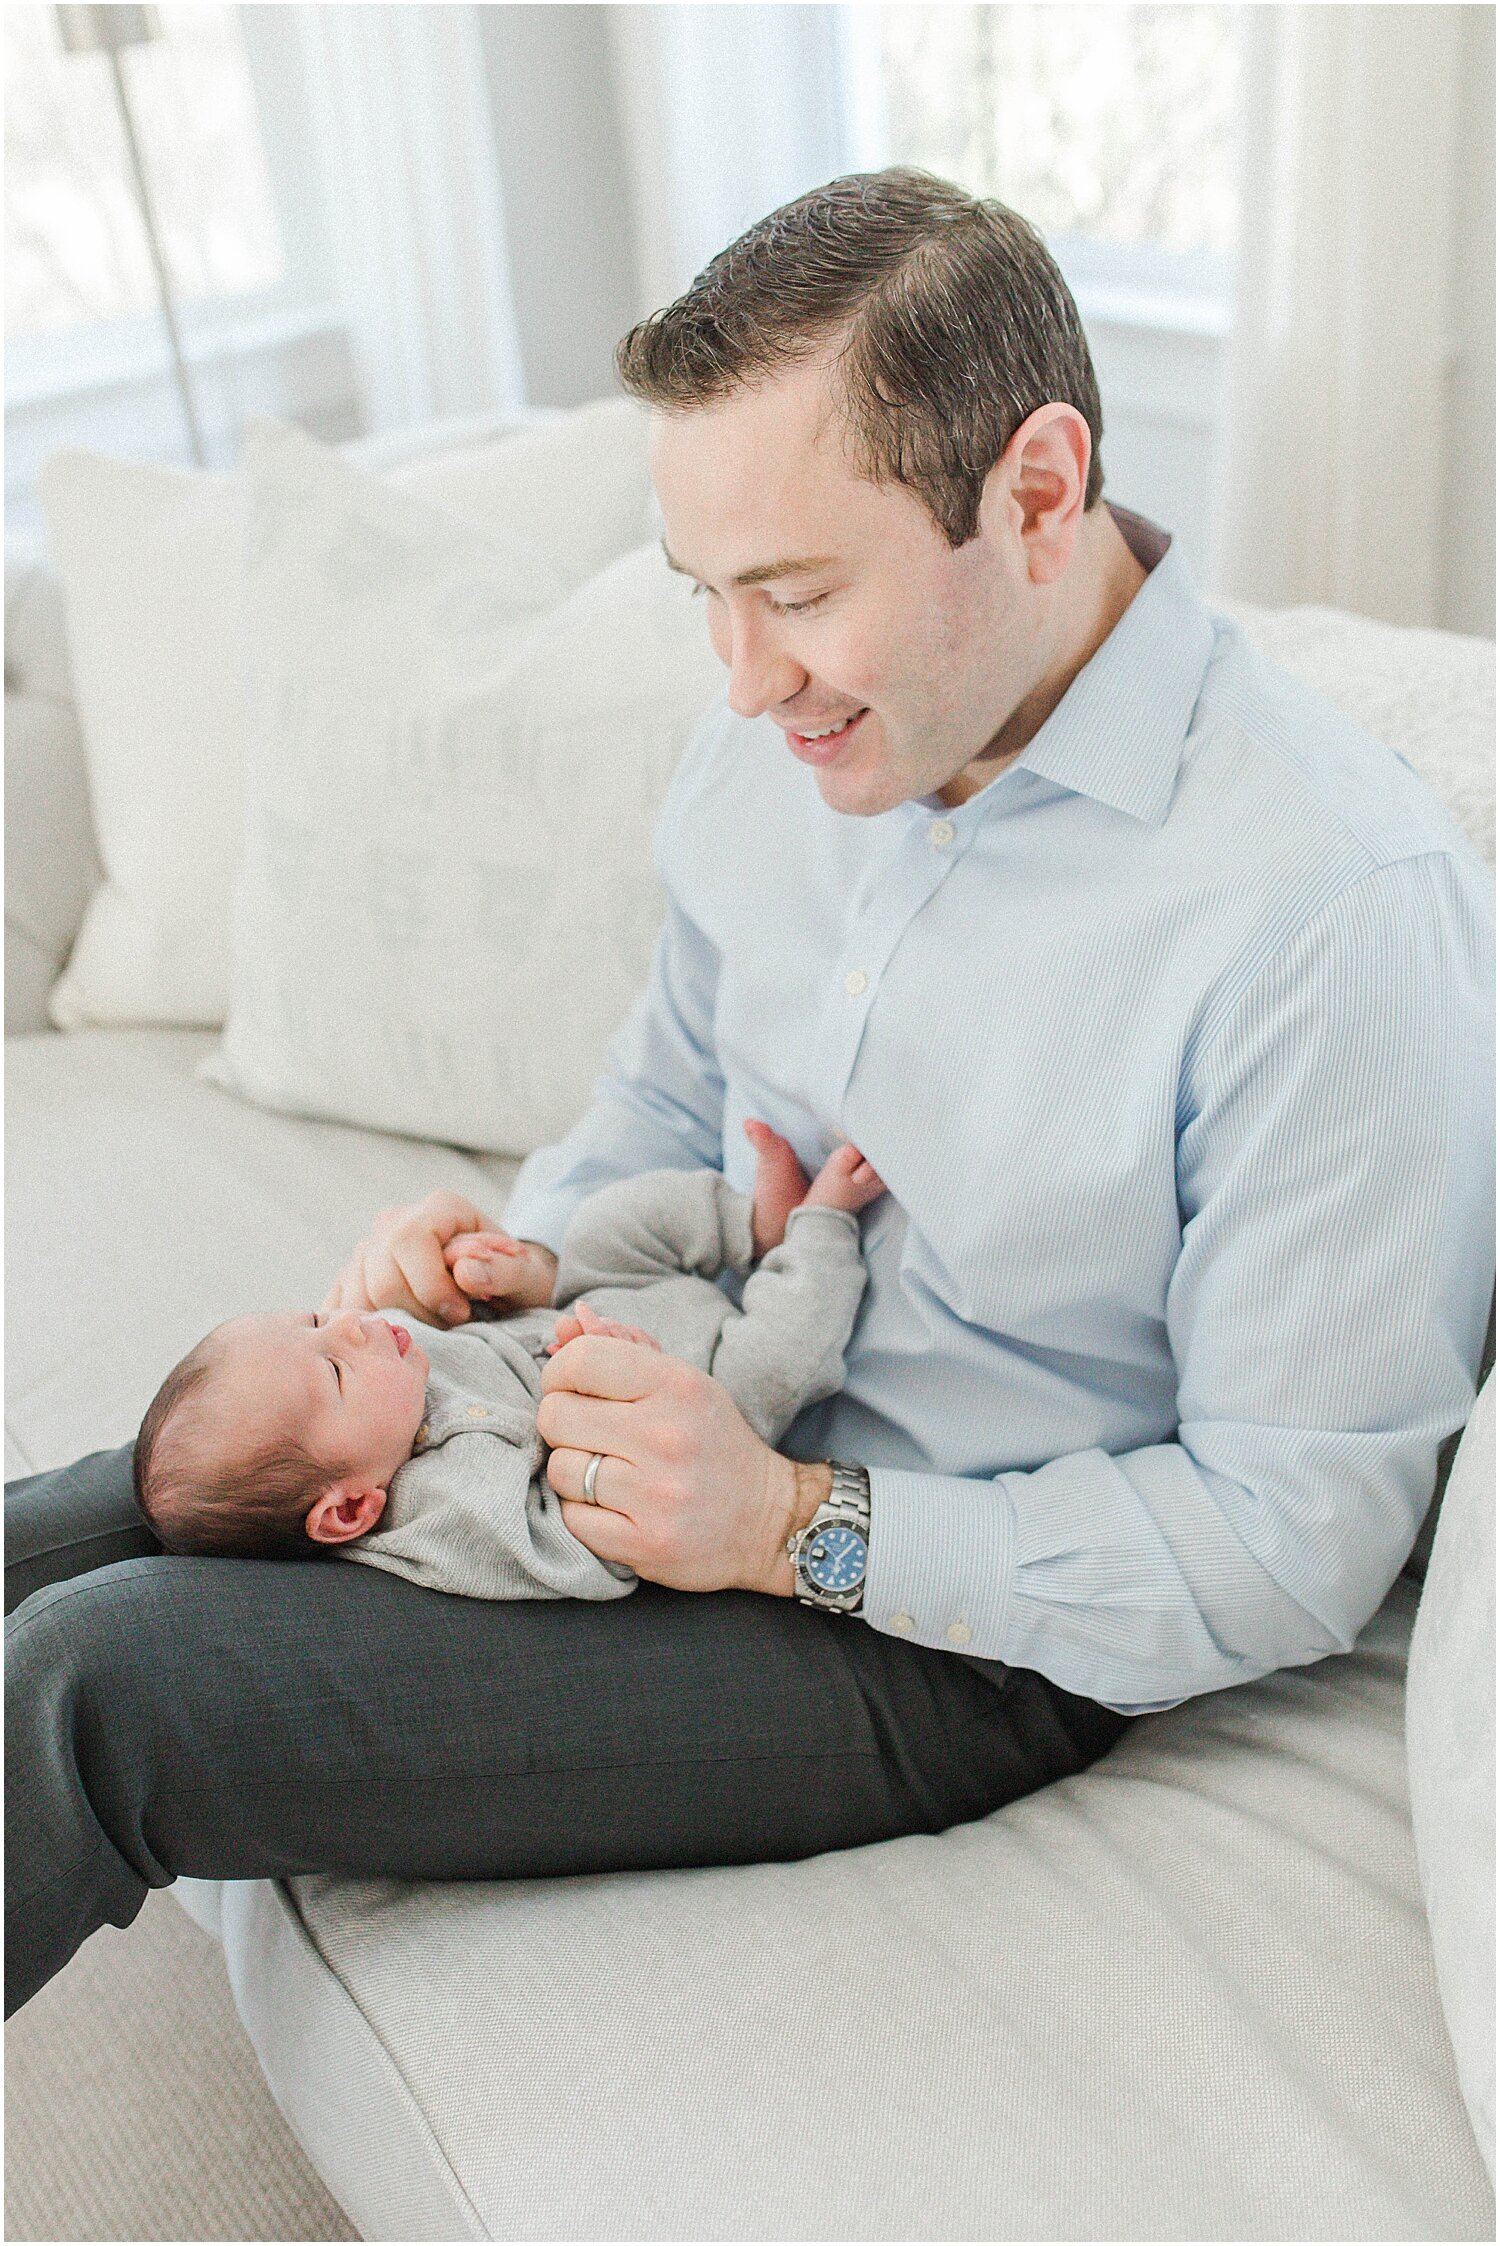 Father and son lifestyle newborn photos during newborn photoshoot. Photos by Kristin Wood Photography.